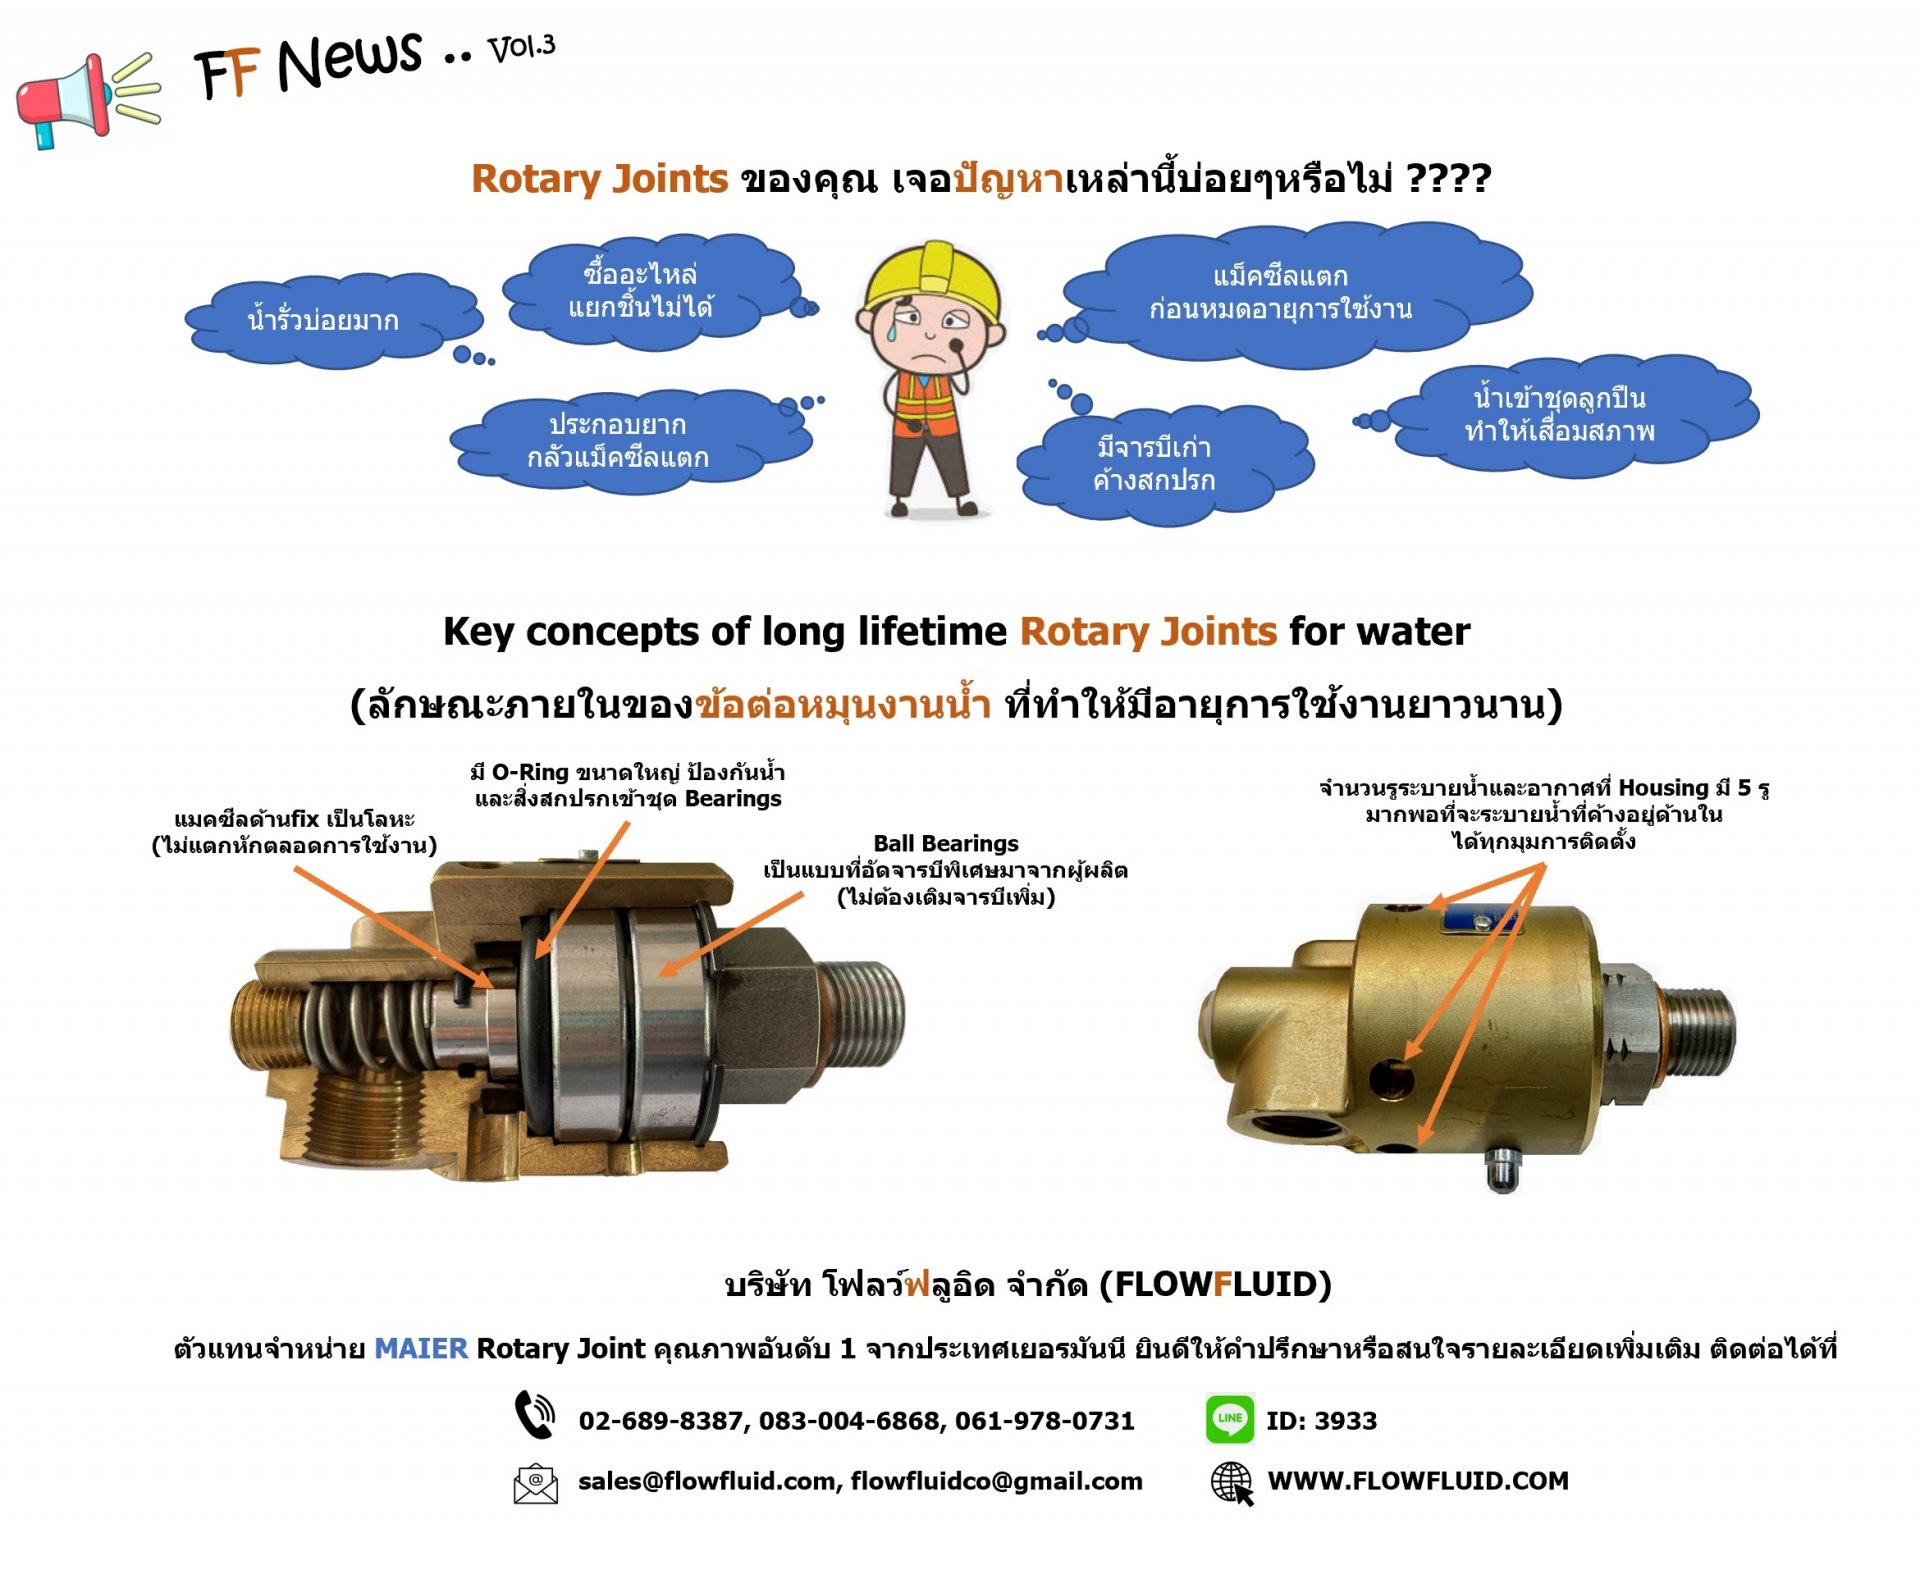 Key Concepts of Rotary Joints for Water